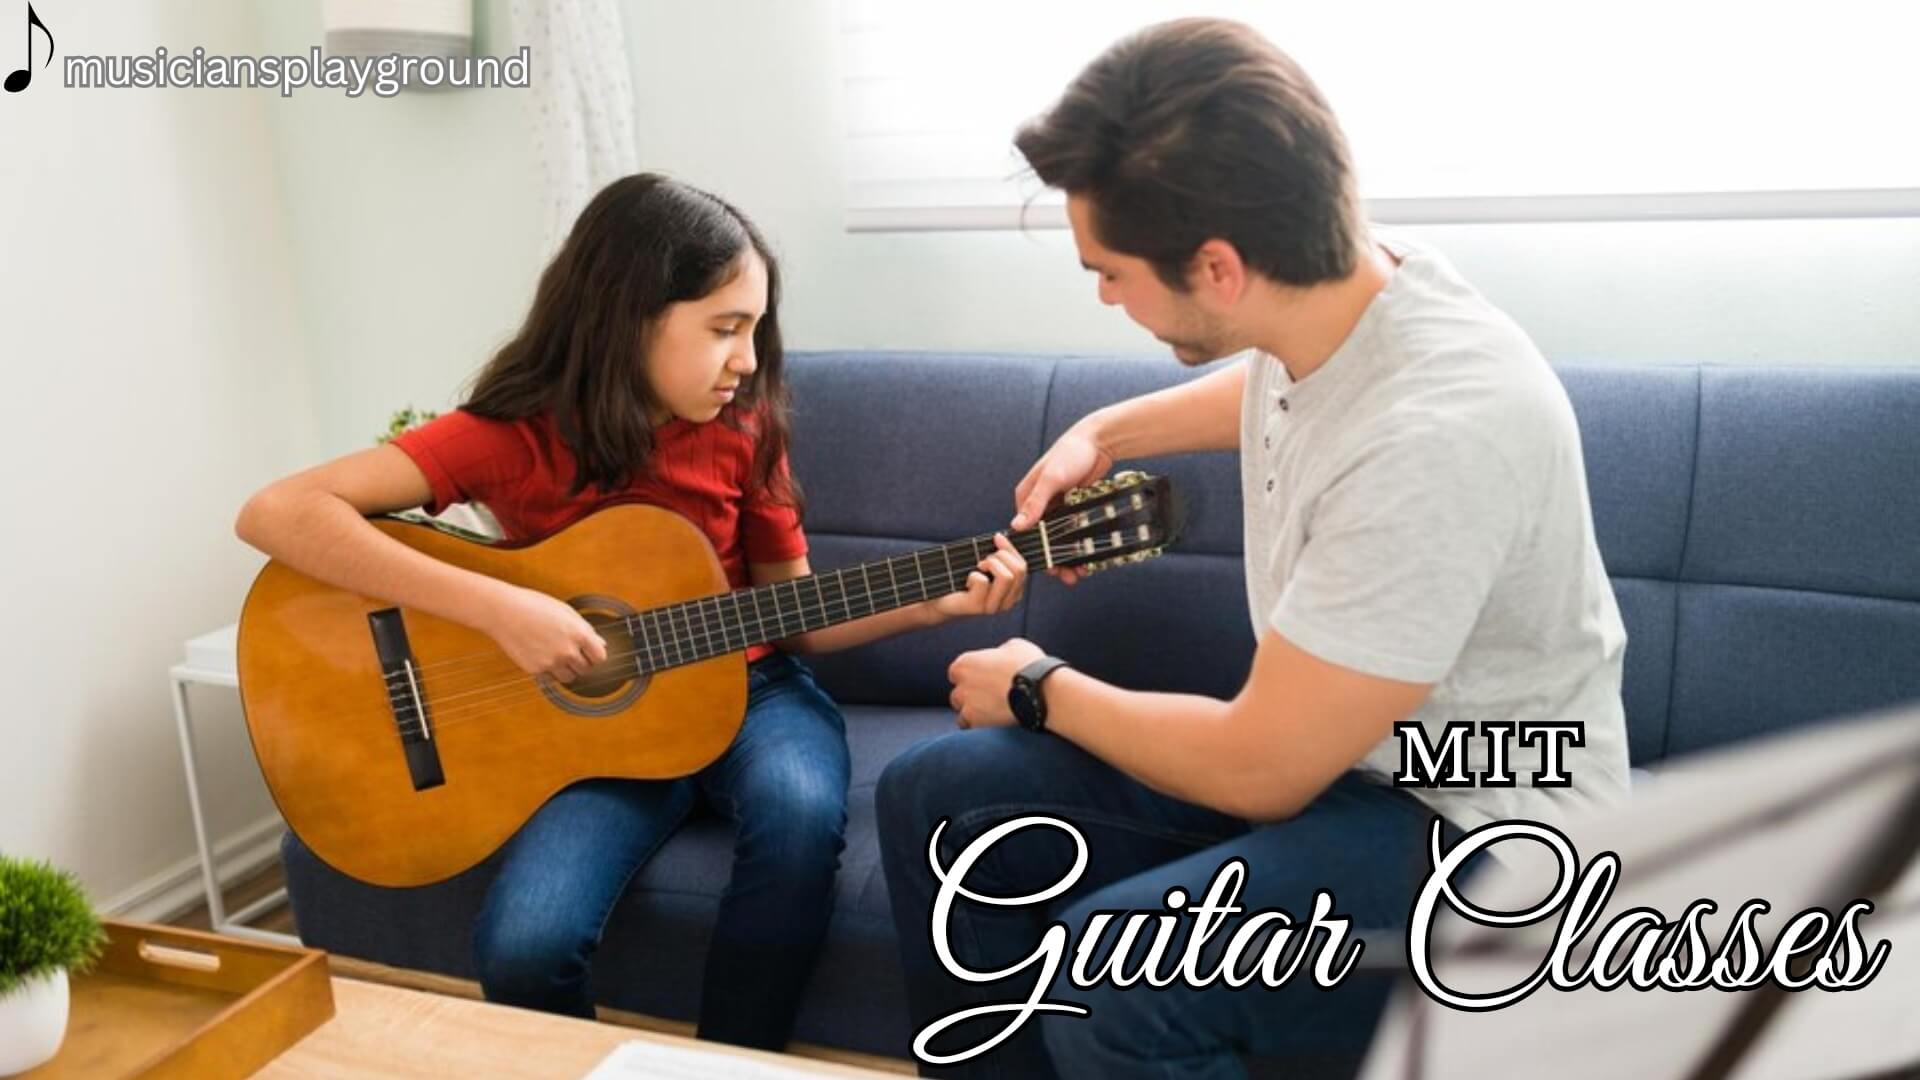 Welcome to MIT: Your Ultimate Destination for Guitar Classes